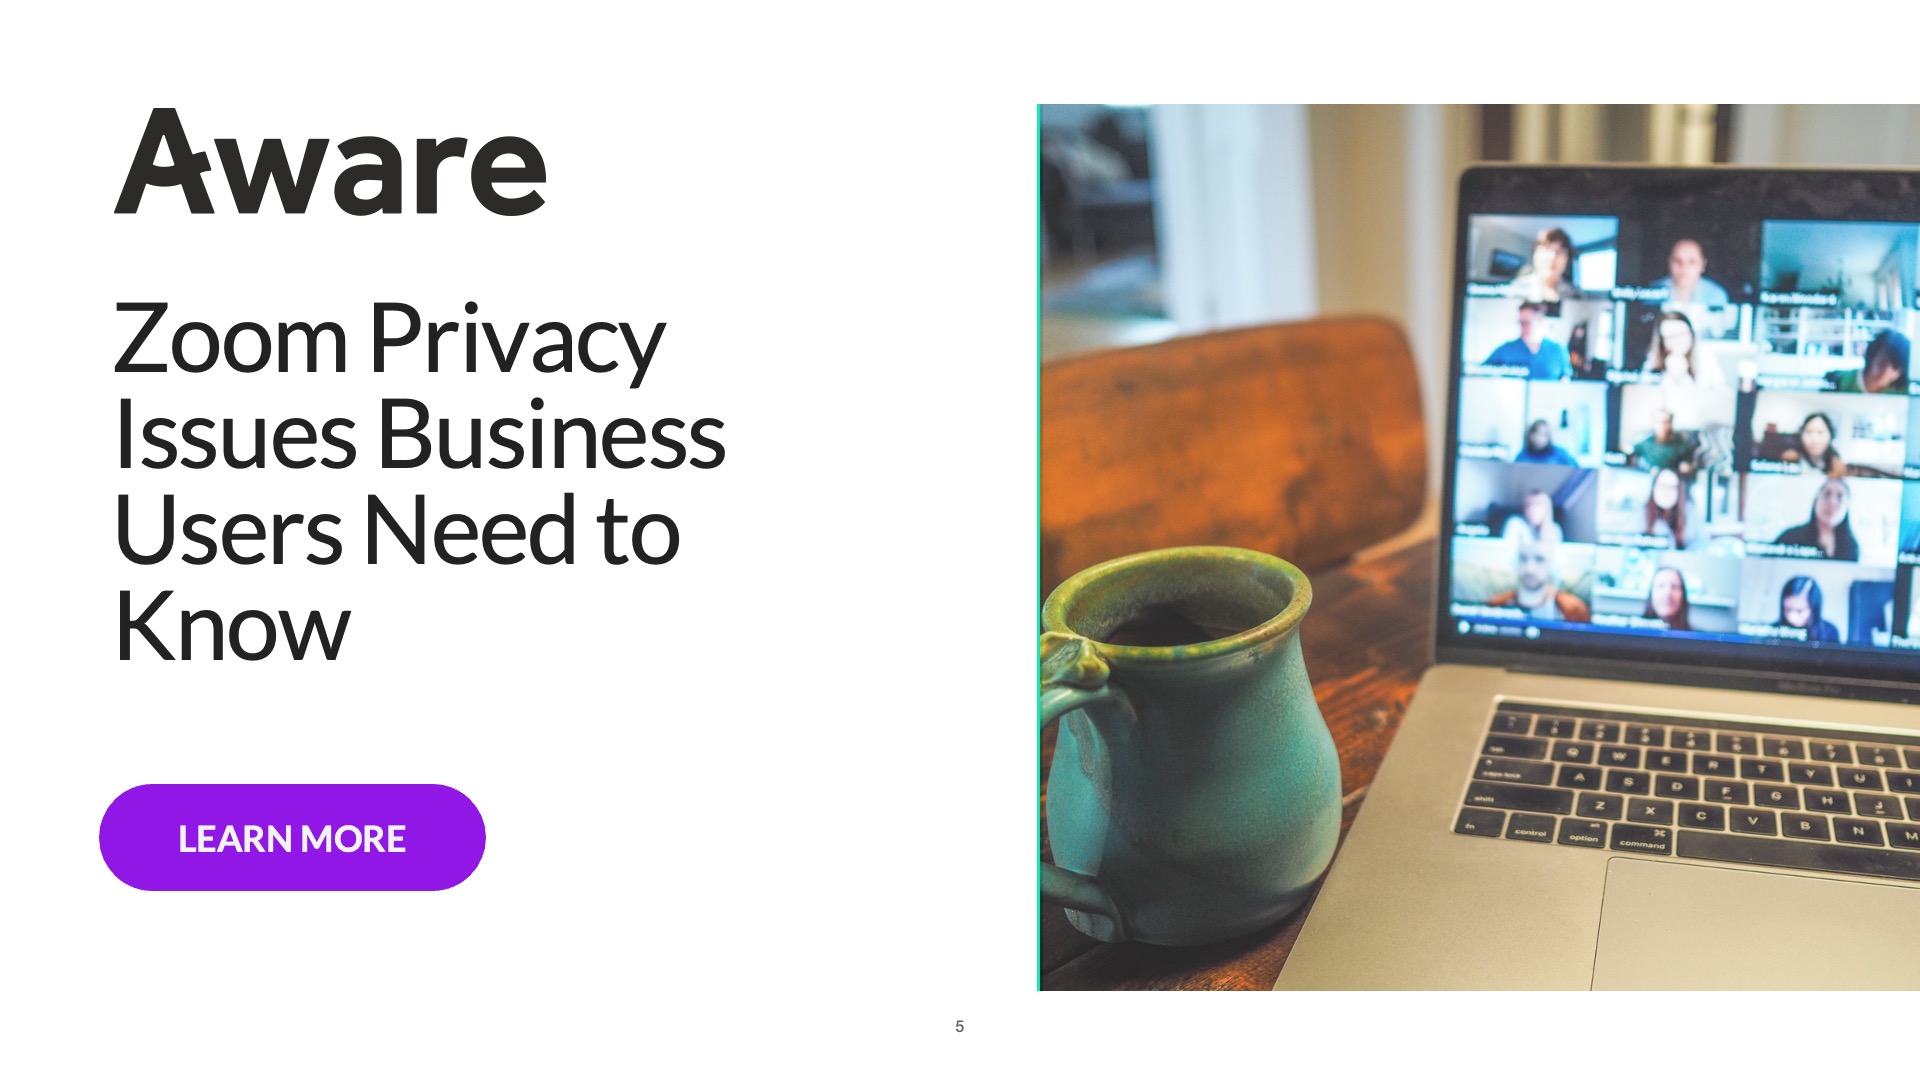 Zoom Privacy Issues Business Users Need to Know